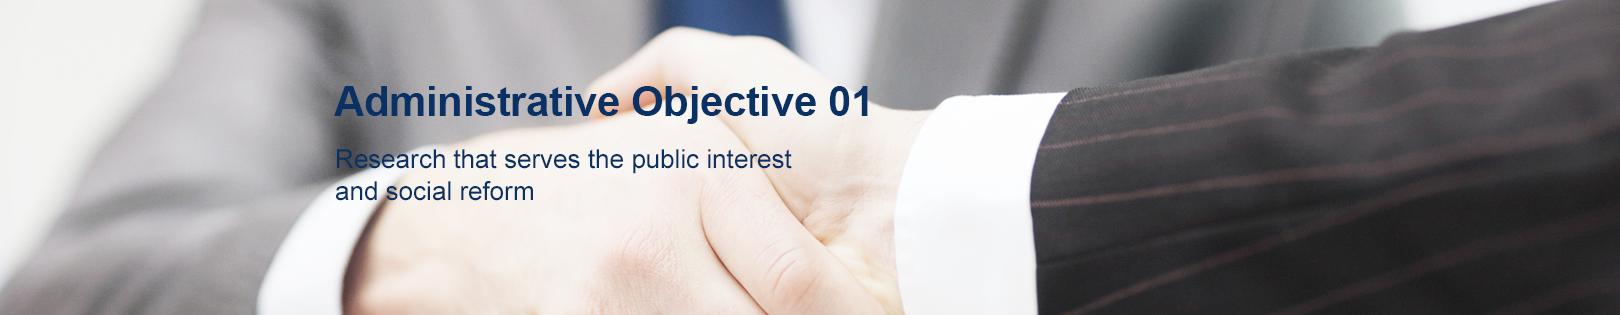 Managerial Objective 02.
Korea Institute of Public Administration(KIPA)